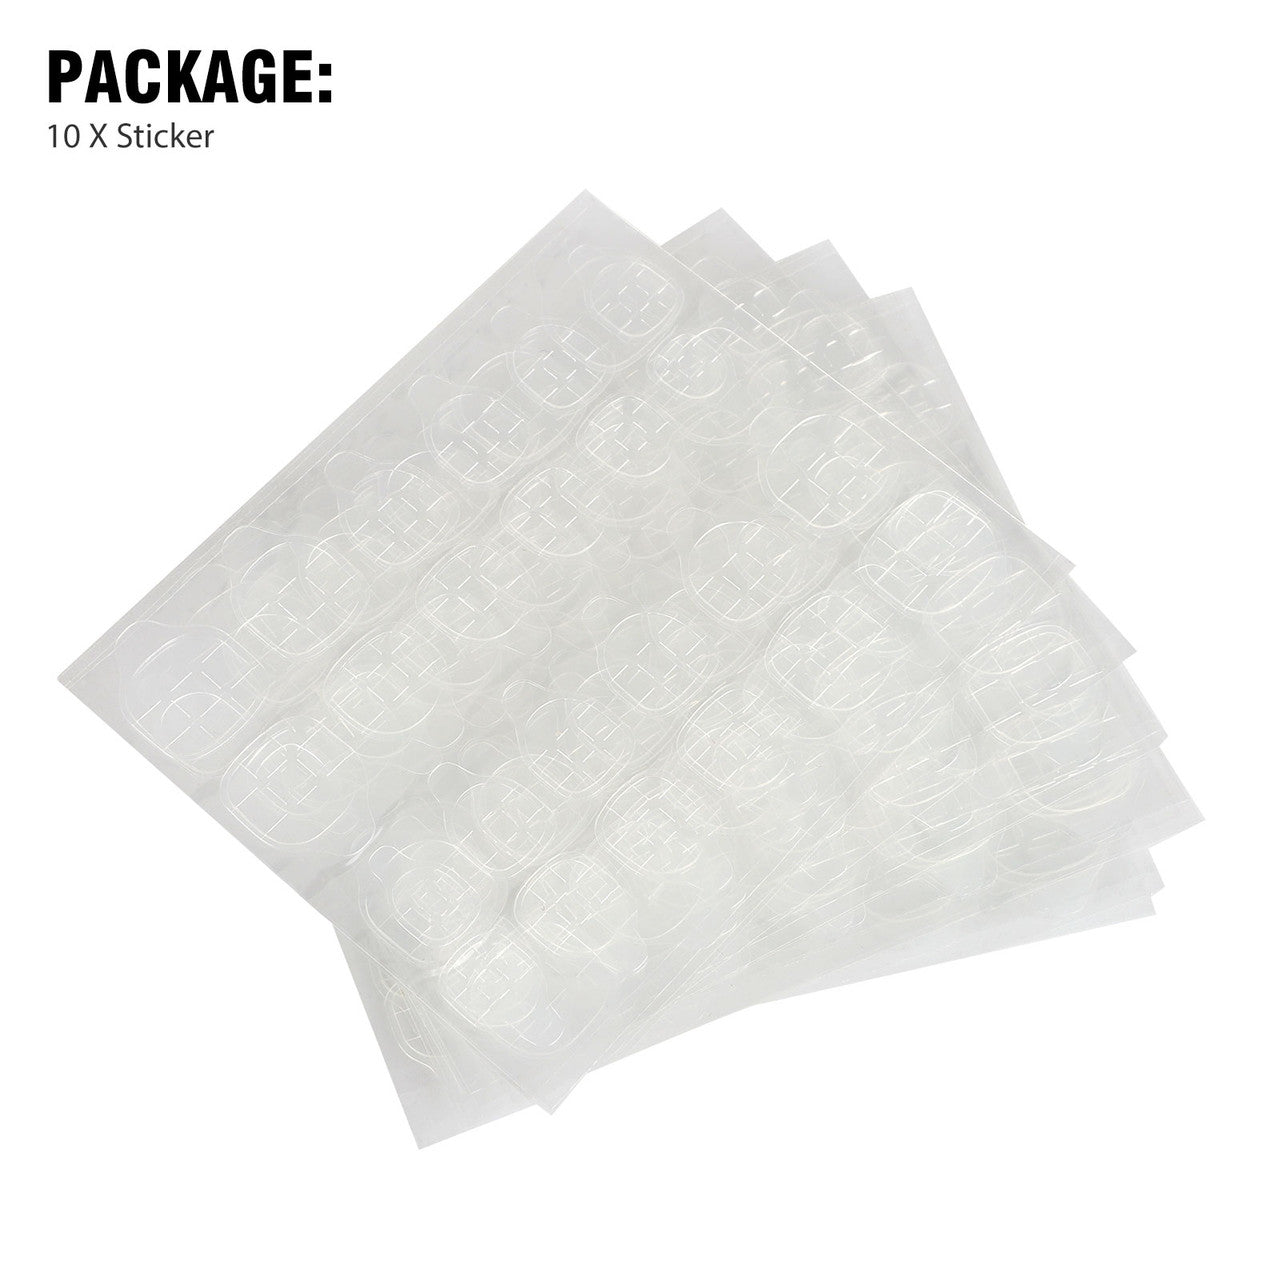 Double-side Nail Glue Sticker Waterproof Breathable Jelly Double Sided Nails Adhesive Tabs for False Nail Tips Nail Glue Transparent Flexible Fake Nail Glue, 10 sheets